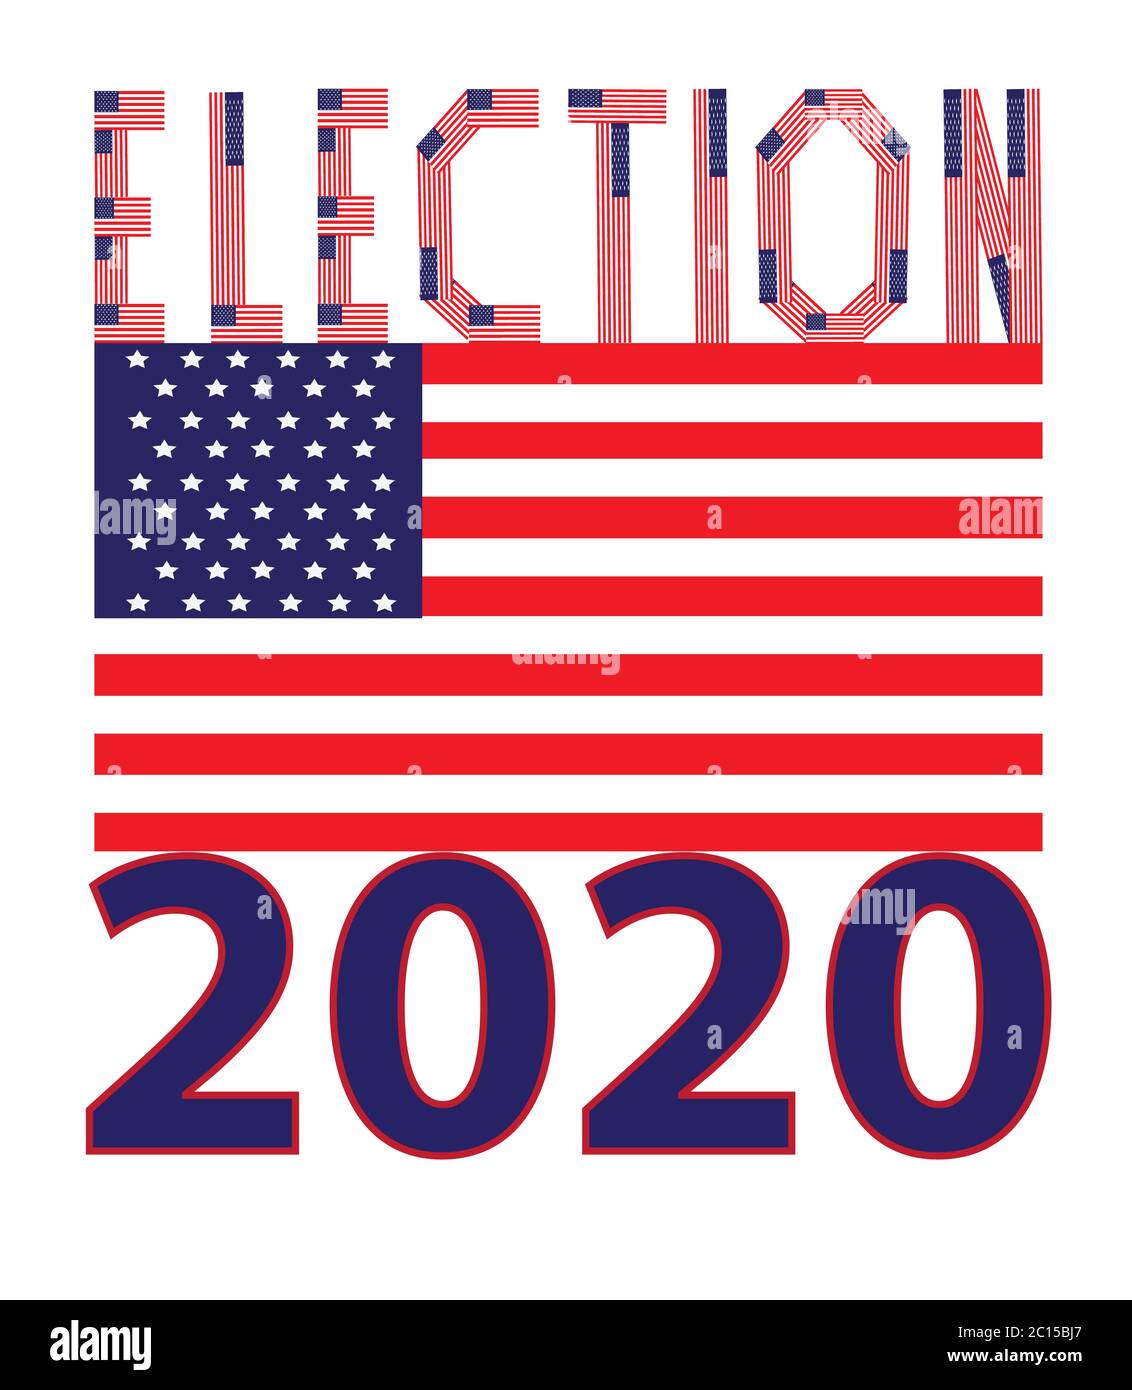 Graphic Sign for USA Presidential Election 2020, American Flag Stock Photo